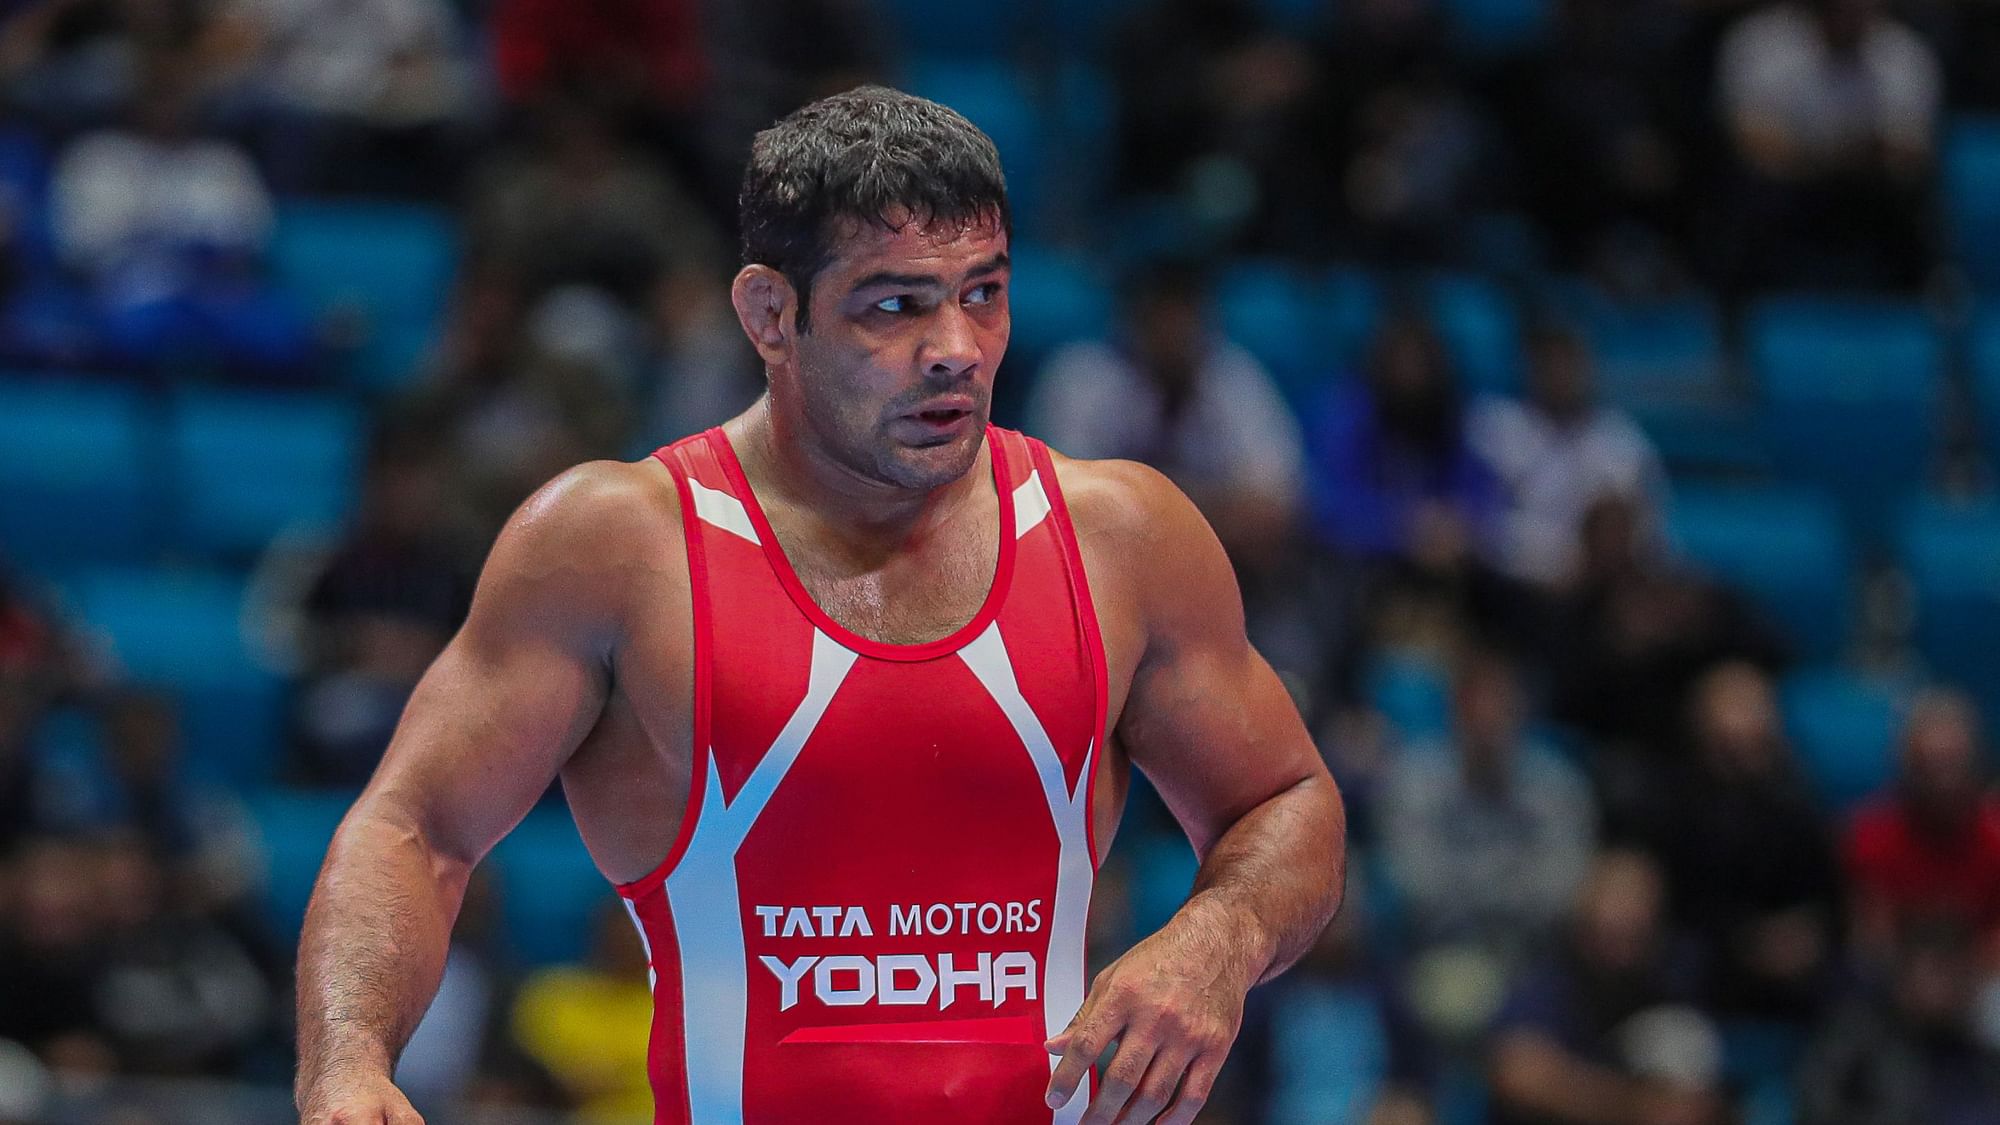 Sushil holds the distinction of being the country’s only two-time Olympic medallist in an individual event and the first Indian to win a wrestling world championship.